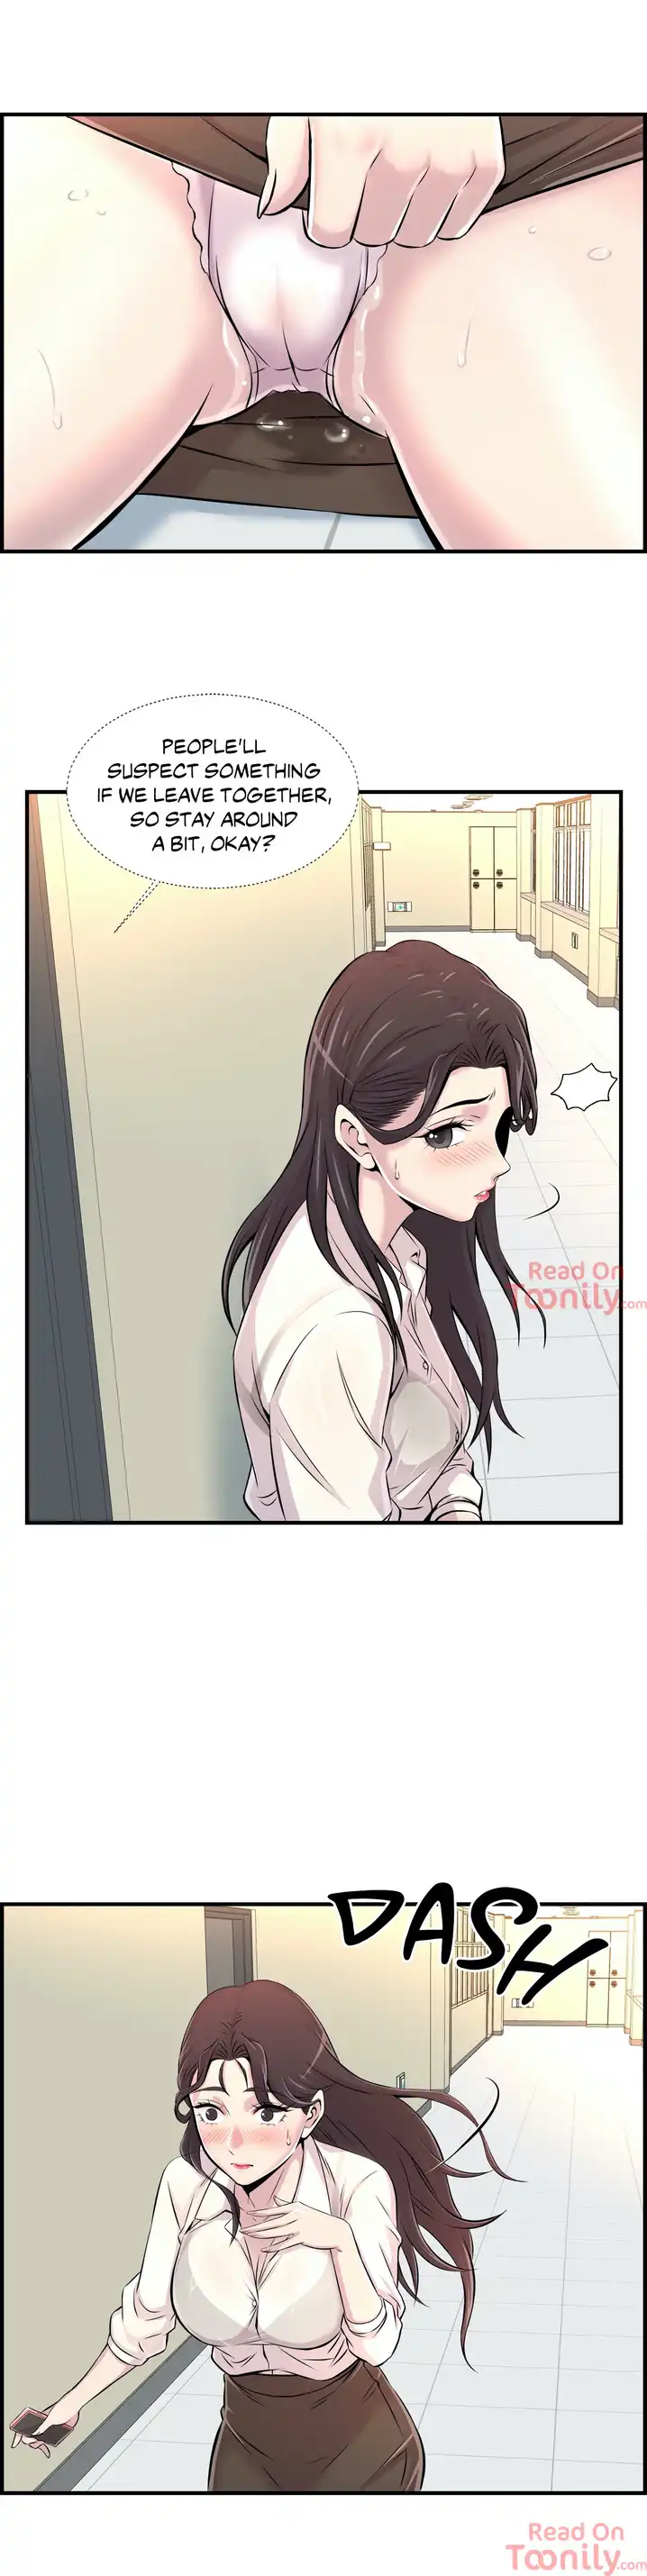 Cram School Scandal - Chapter 3 Page 32